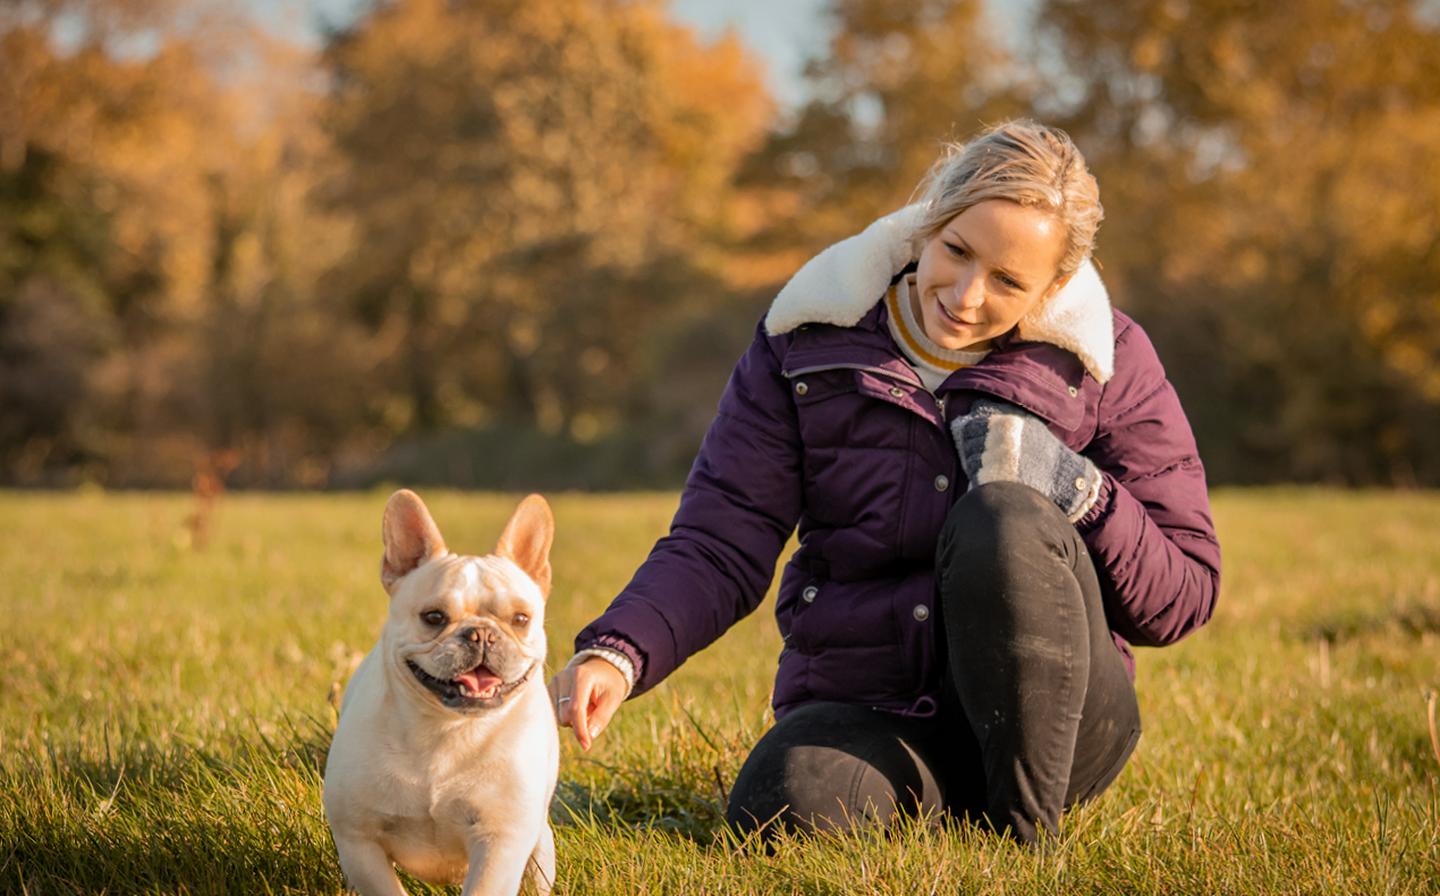 Steph, who works at FatFace HQ, wearing the Poppy Puffer Jacket while playing with her dog Dax in a field